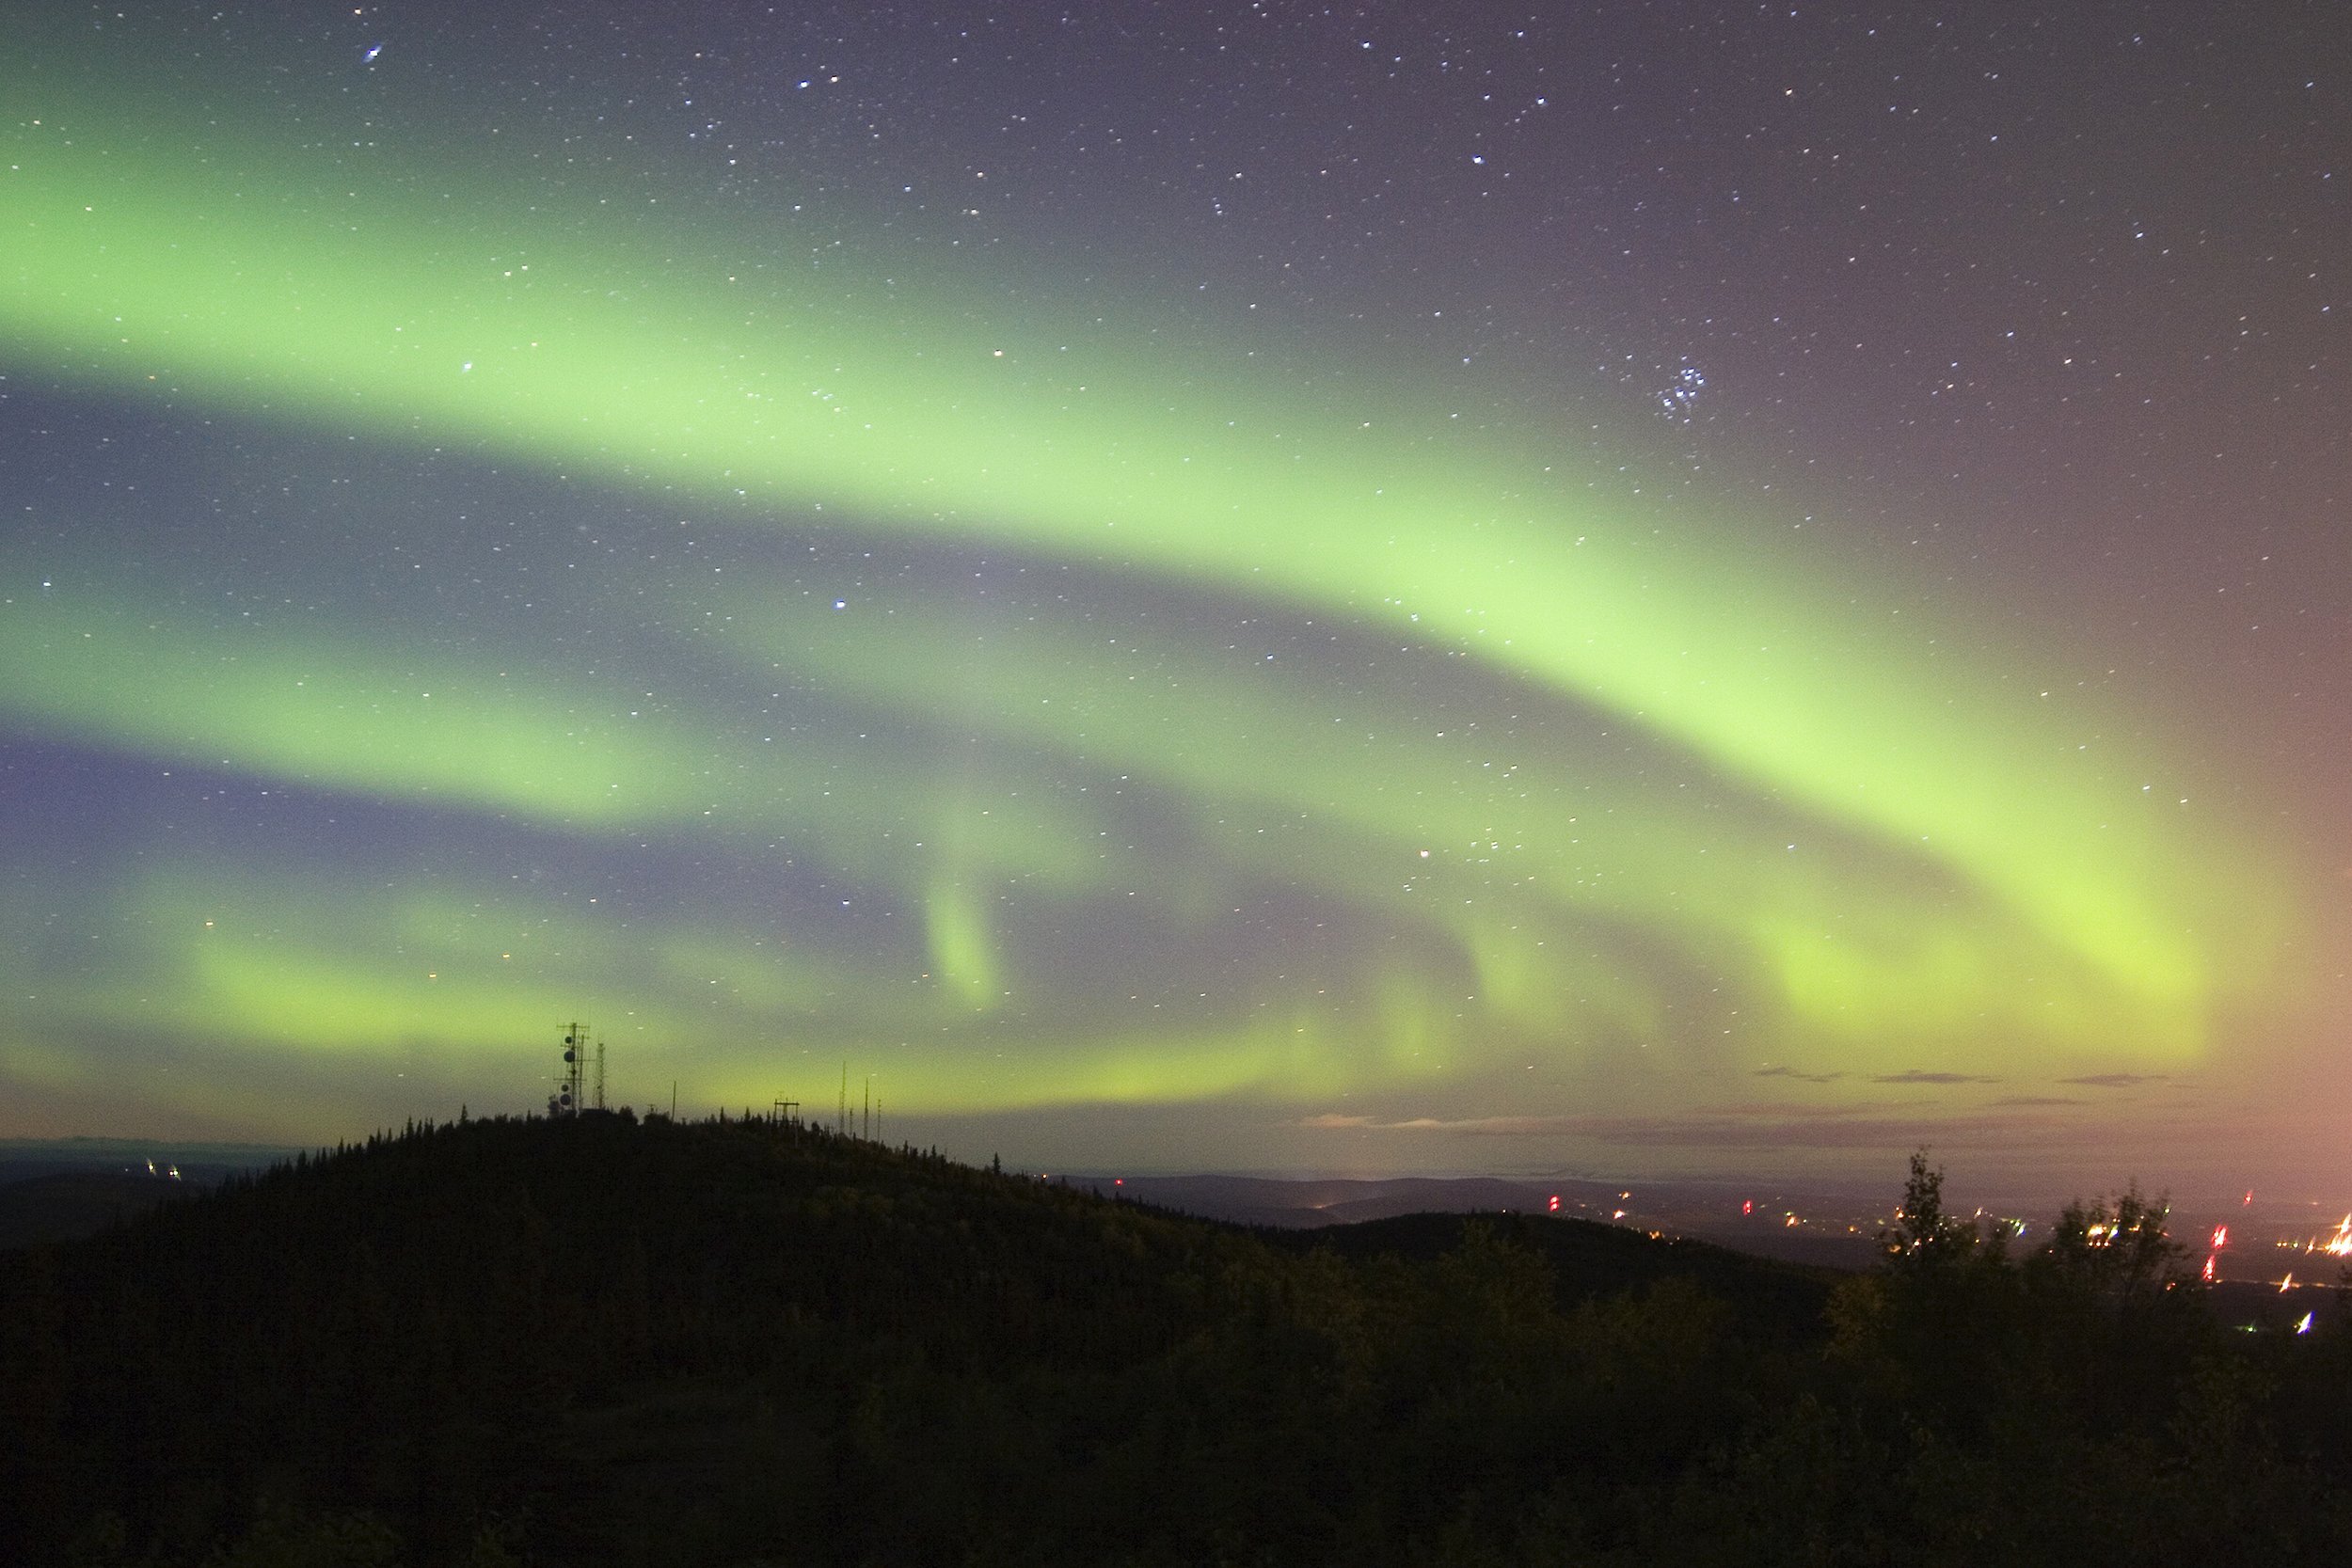 <p>Fairbanks is only 198 miles from the Arctic Circle in the auroral oval, making this cold city a hot spot for travelers who want to see the <a href="https://www.cheapism.com/blog/how-see-northern-lights-cheap-3850/">Northern Lights</a>. City officials recommend at least a three-day stay in fall, winter, or early spring for an 80% chance of successful viewing. Area hotels offer Northern Lights wakeup calls, but visitors can also opt for a more quintessentially Alaskan experience, such as a cabin stay or sled-dog trip.</p>